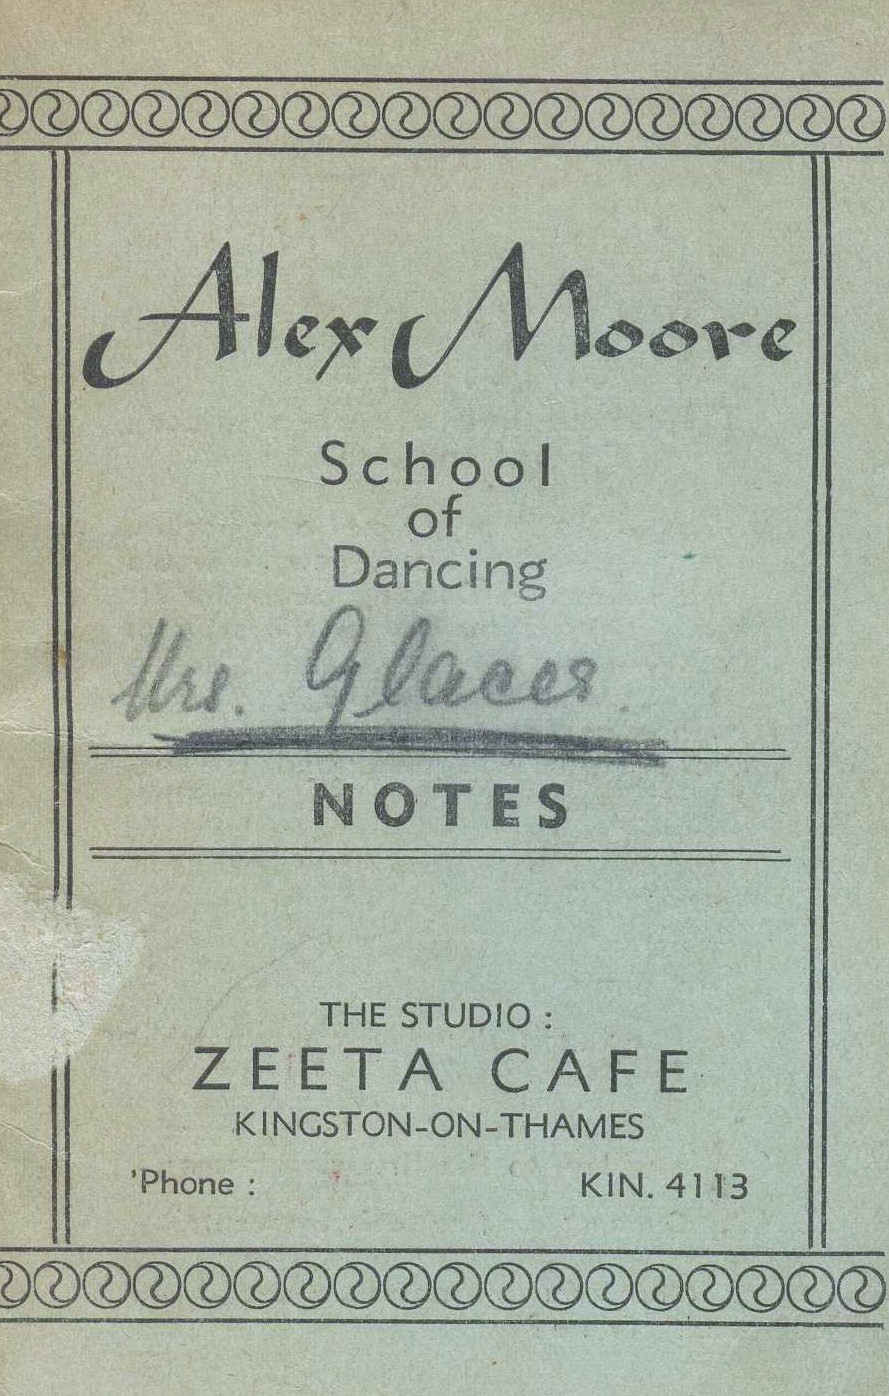 1939 Aunt Rosie attended dance academy in London
